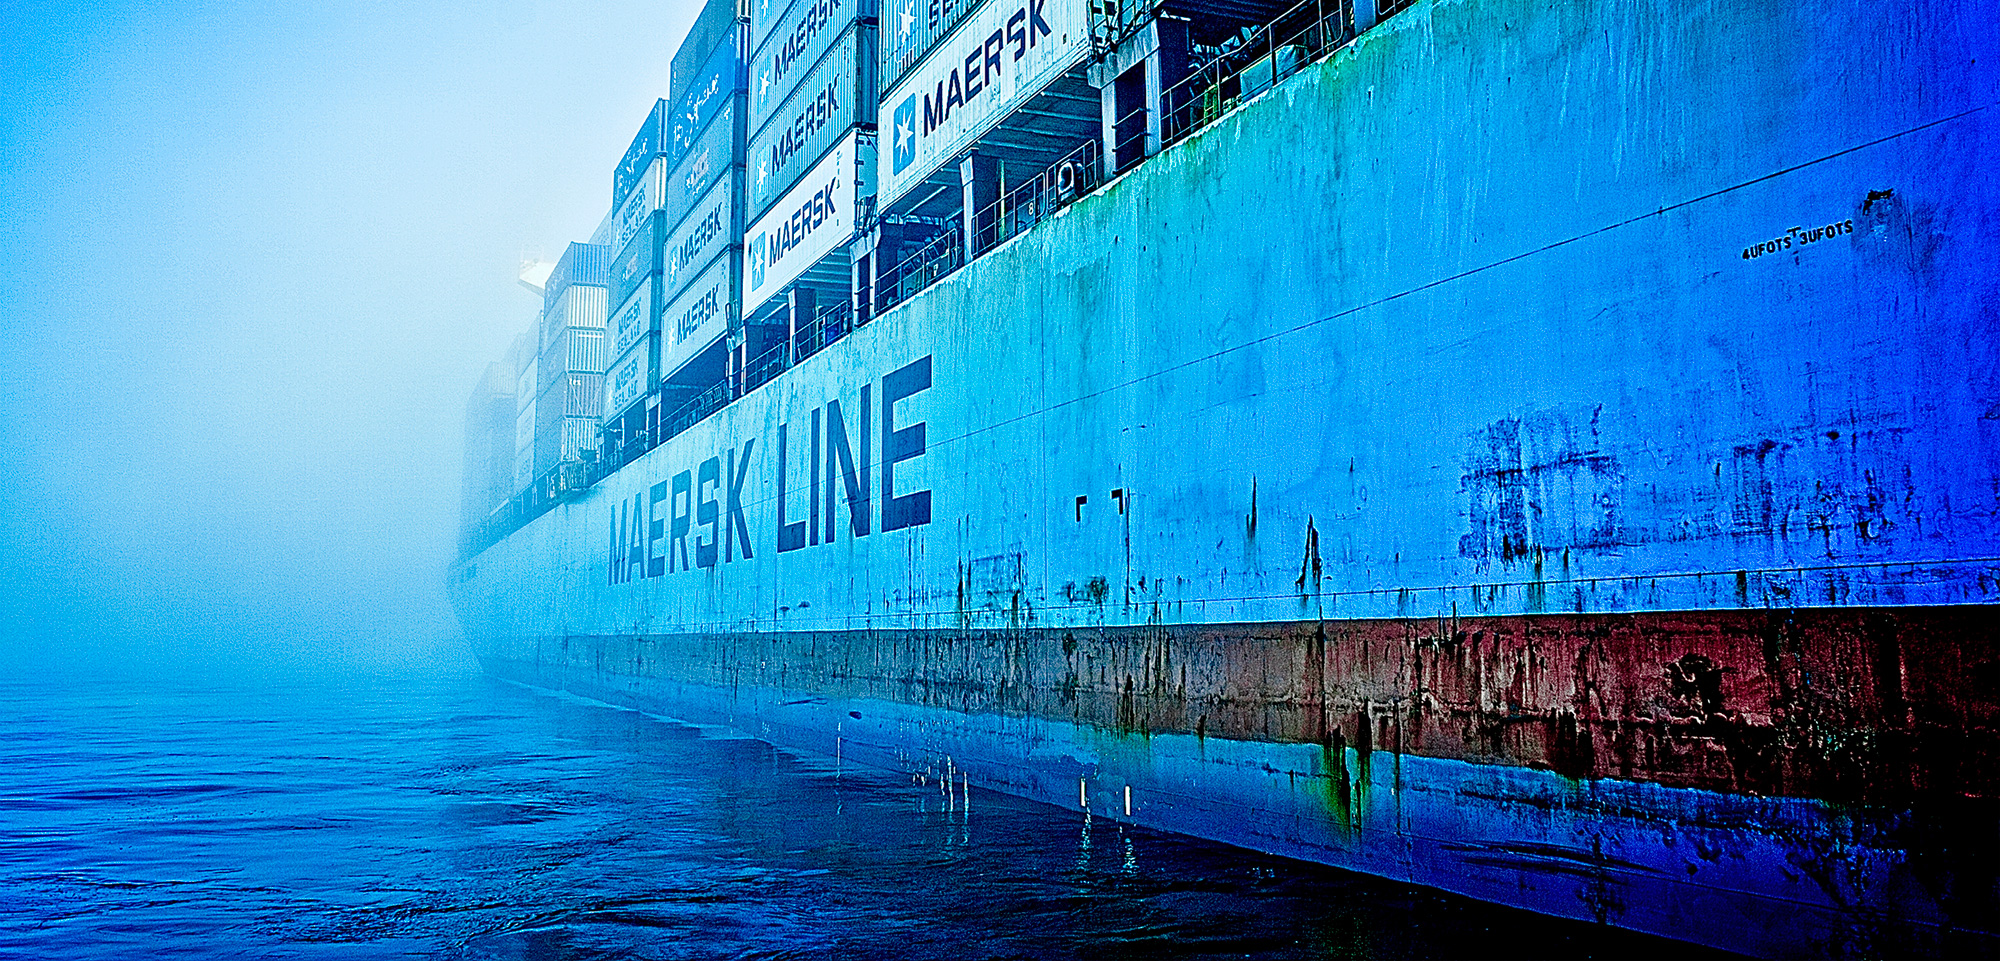 a Maersk container ship